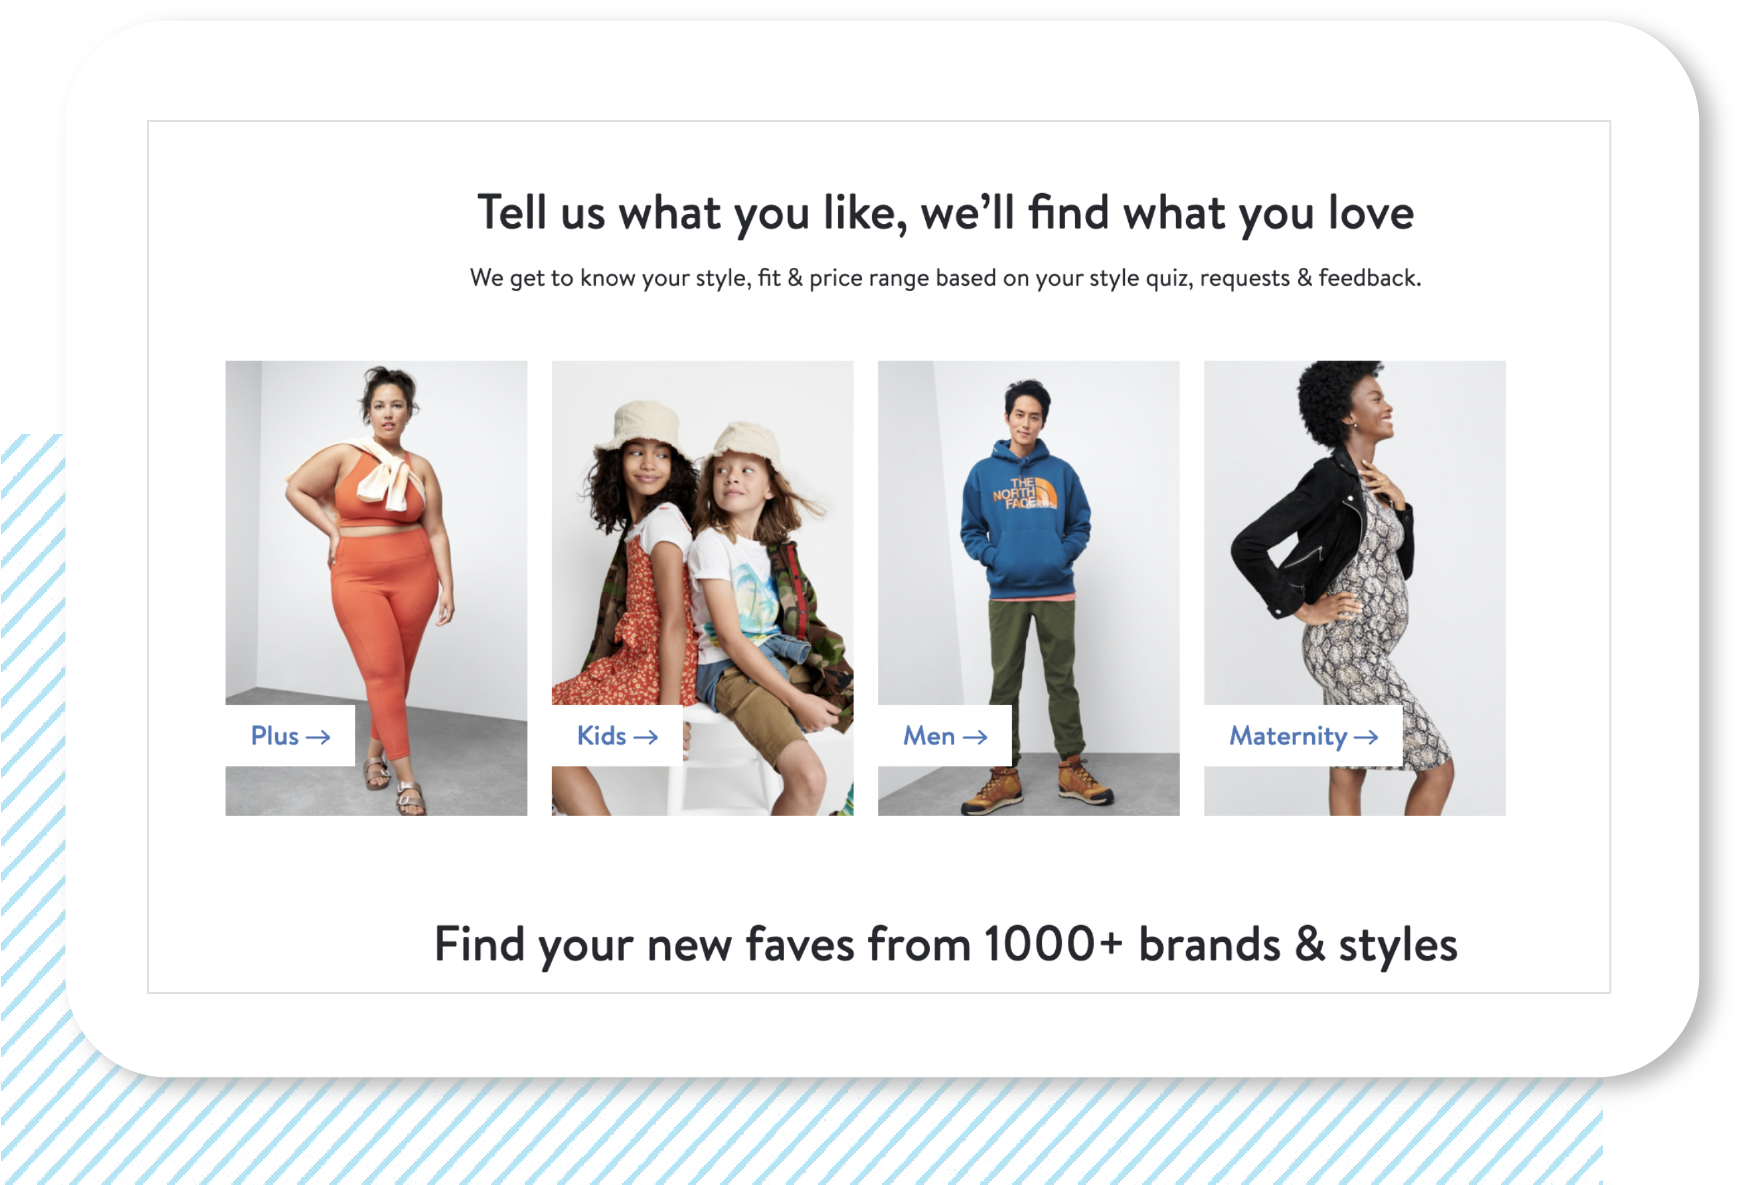 Stitch Fix is an example of a curated subscription experience.